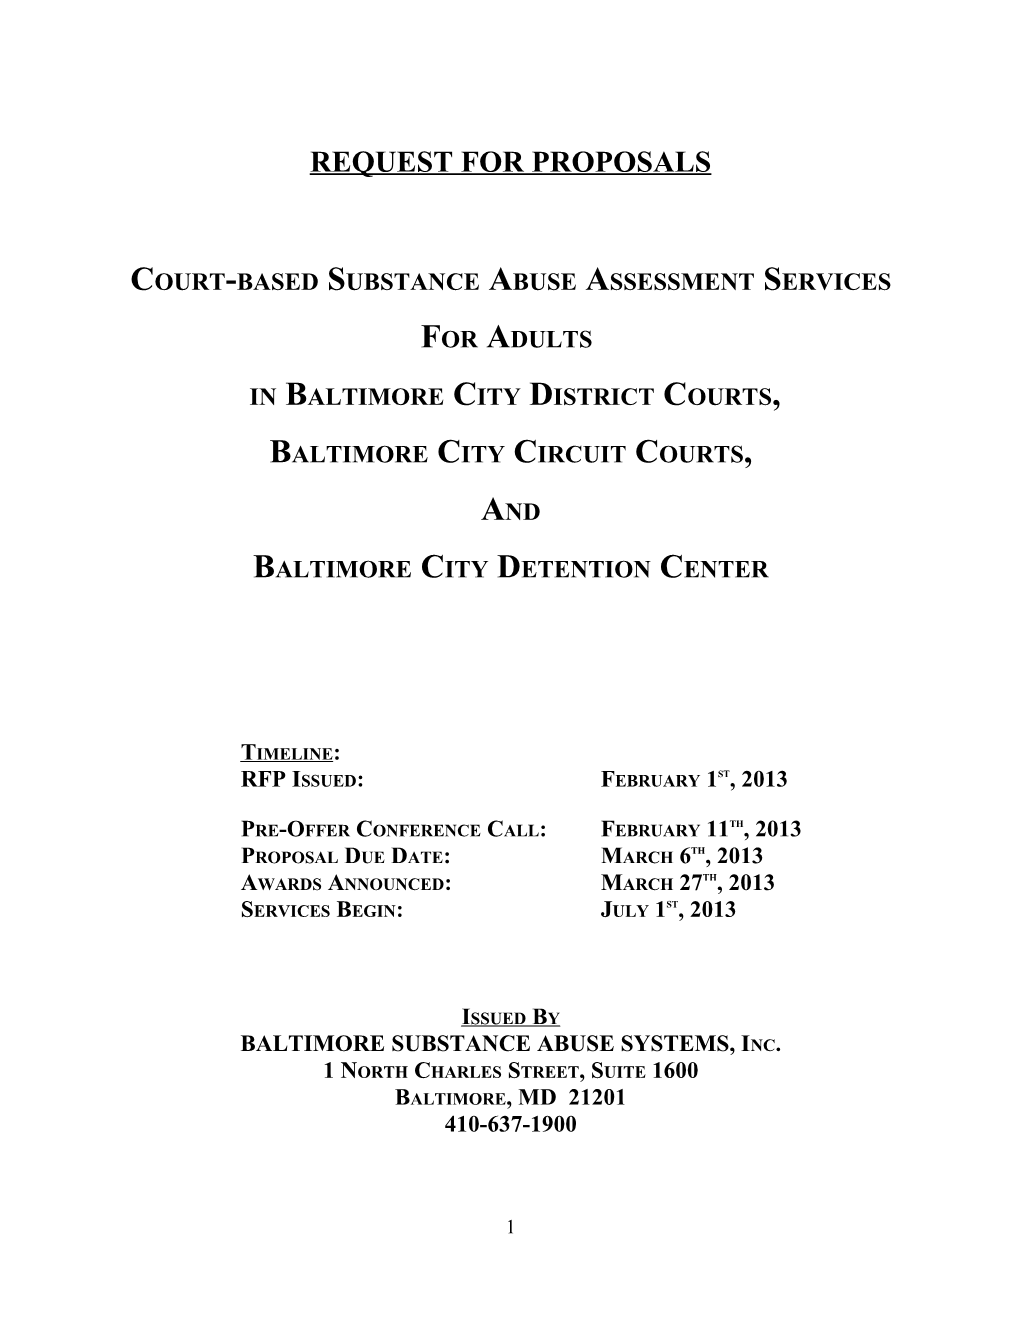 Court-Based Substance Abuse Assessment Services